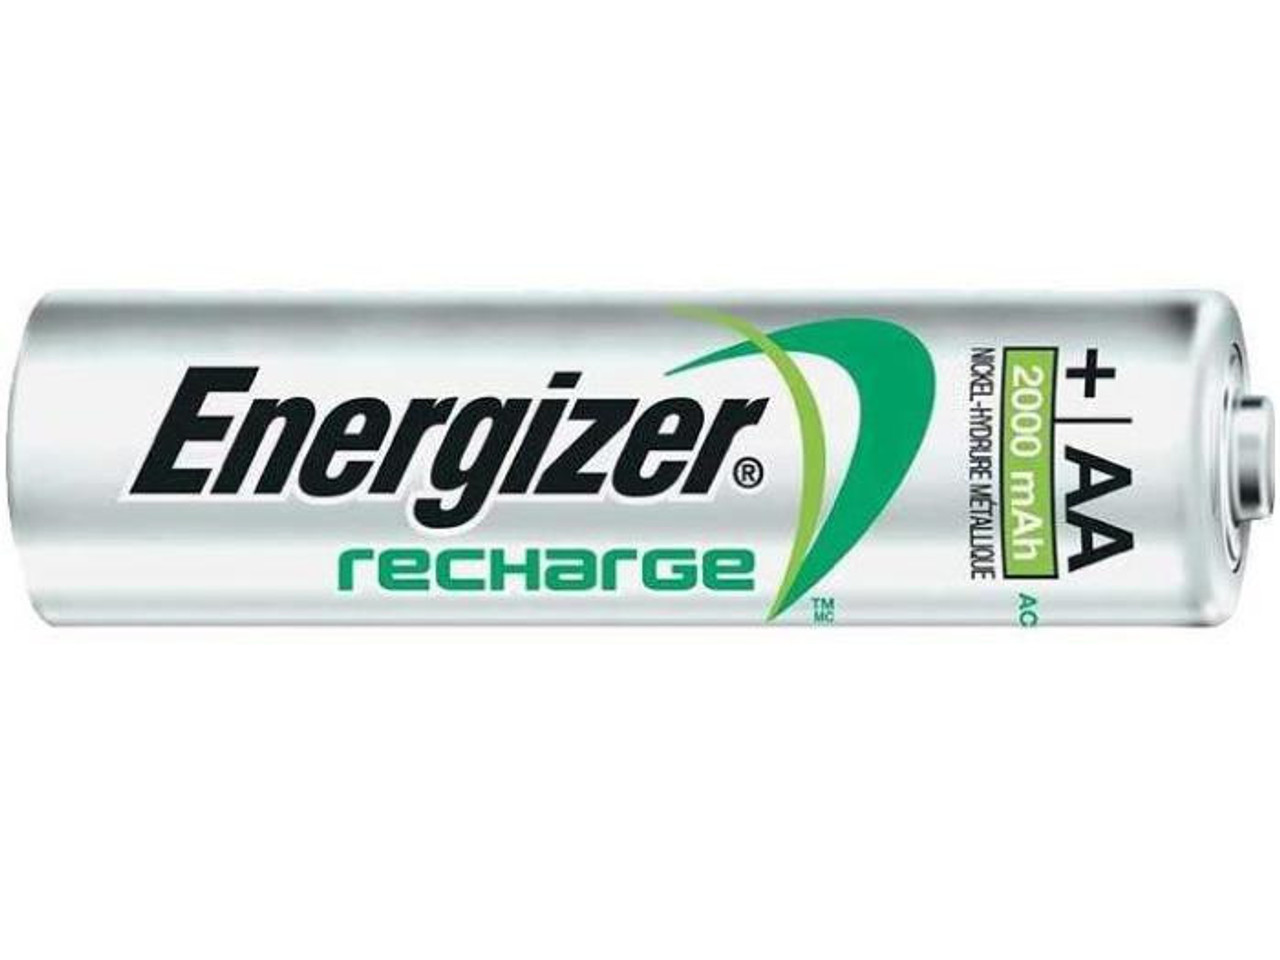 Energizer AA Rechargeable NiMH Batteries 2300 mAh - 12 Pack FREE SHIPPING